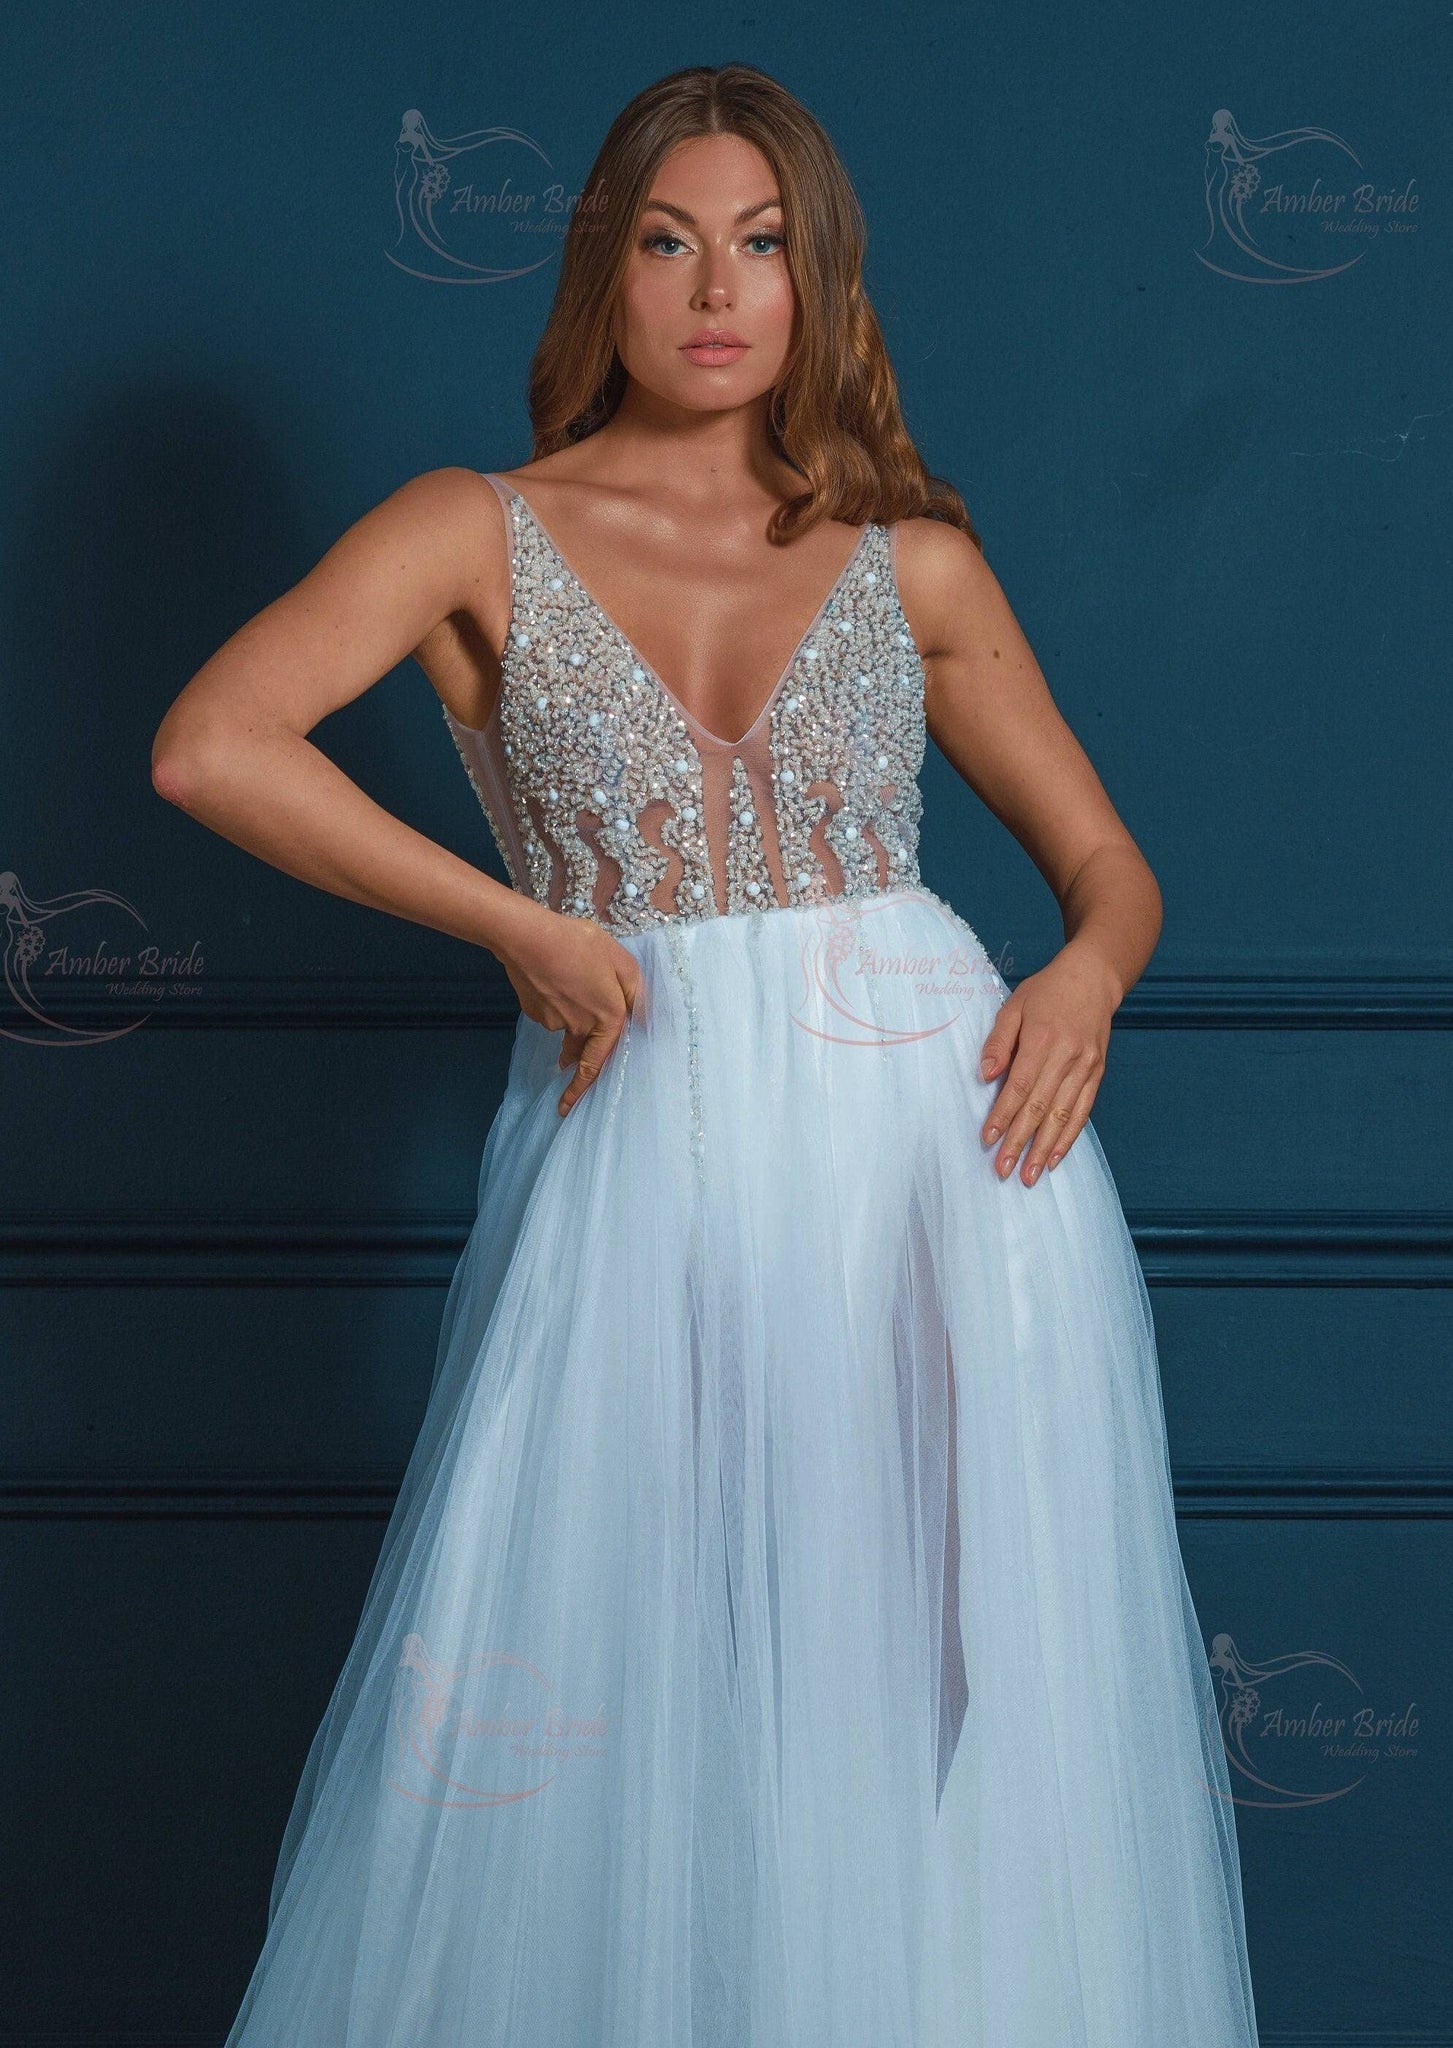 Exclusive A Line Backless Tulle Wedding Dress - AmberBride